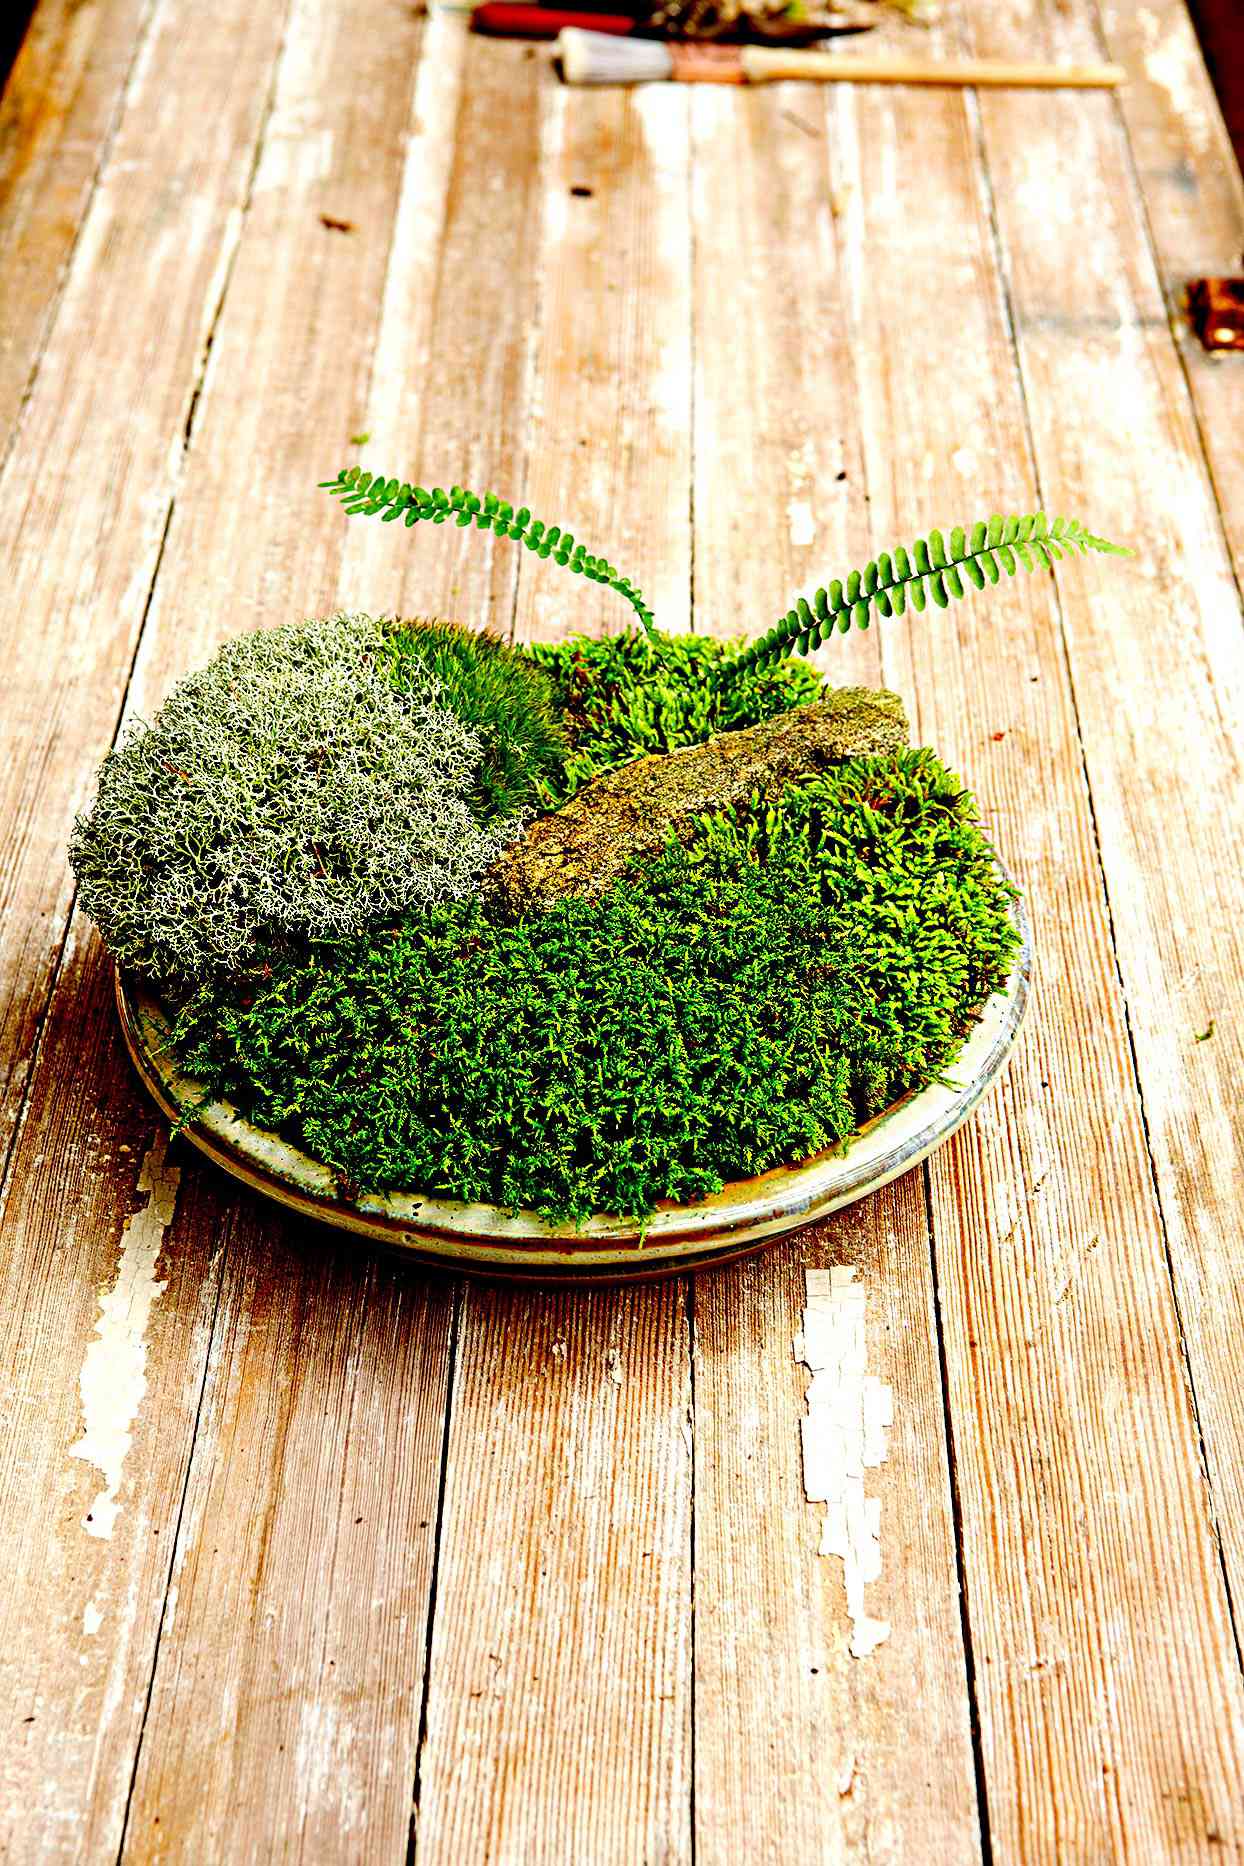 Moss growing in a dish planter